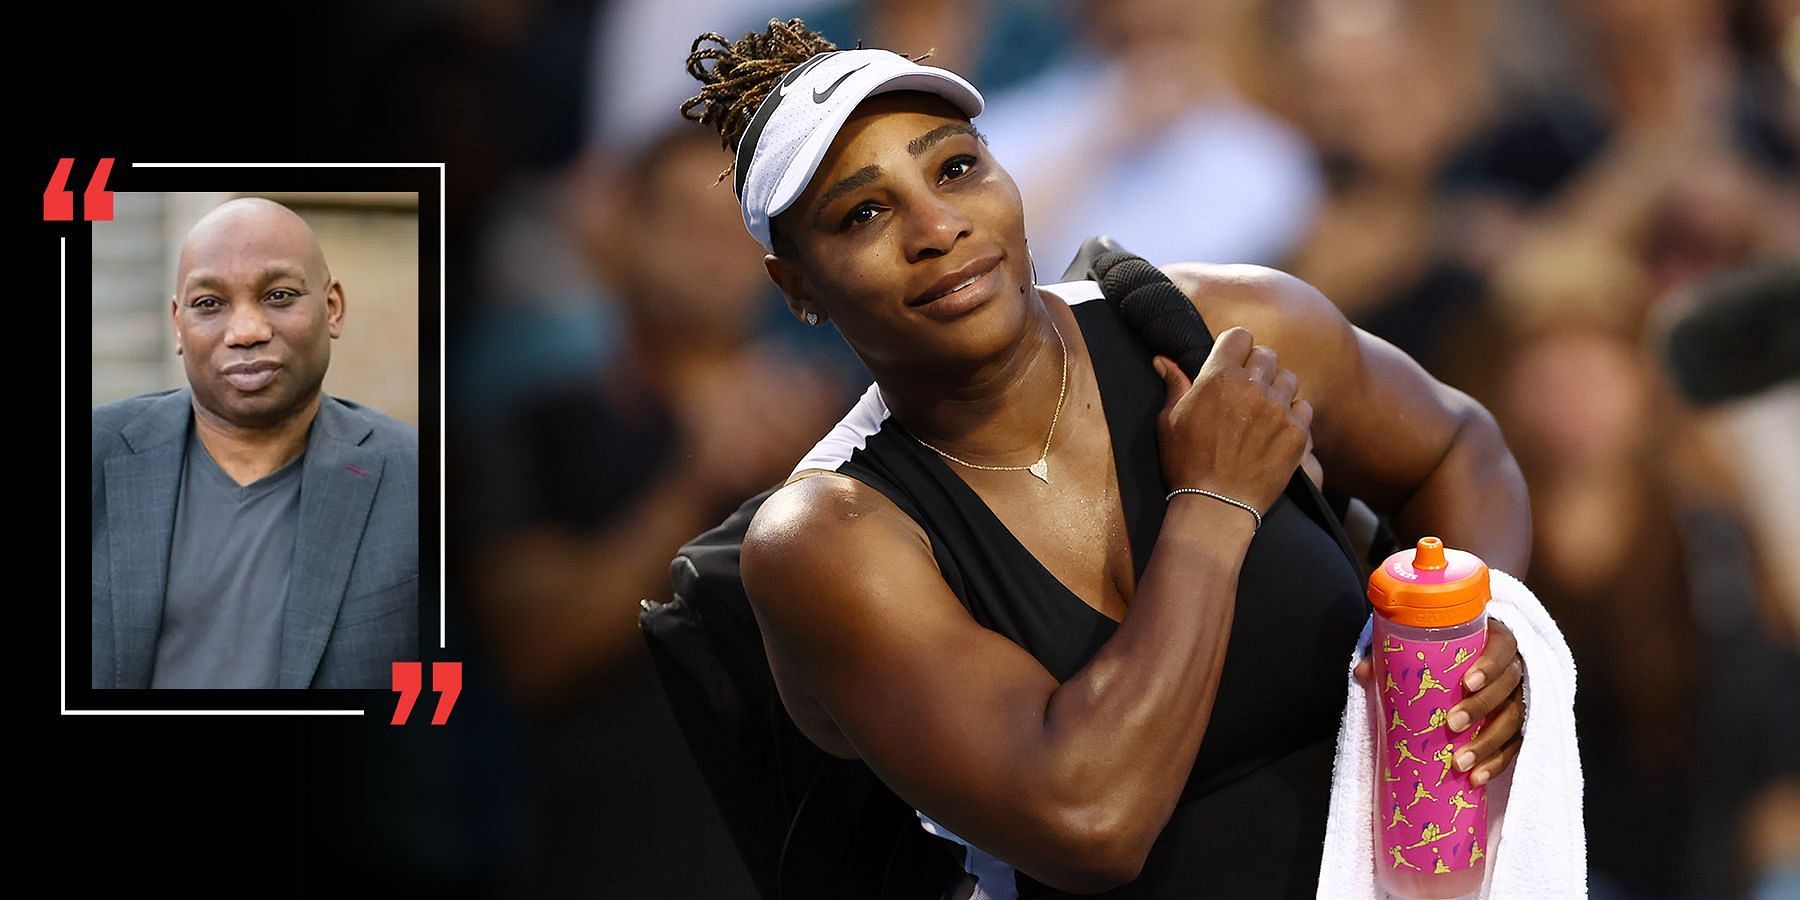 Serena Williams is set to retire after the US Open